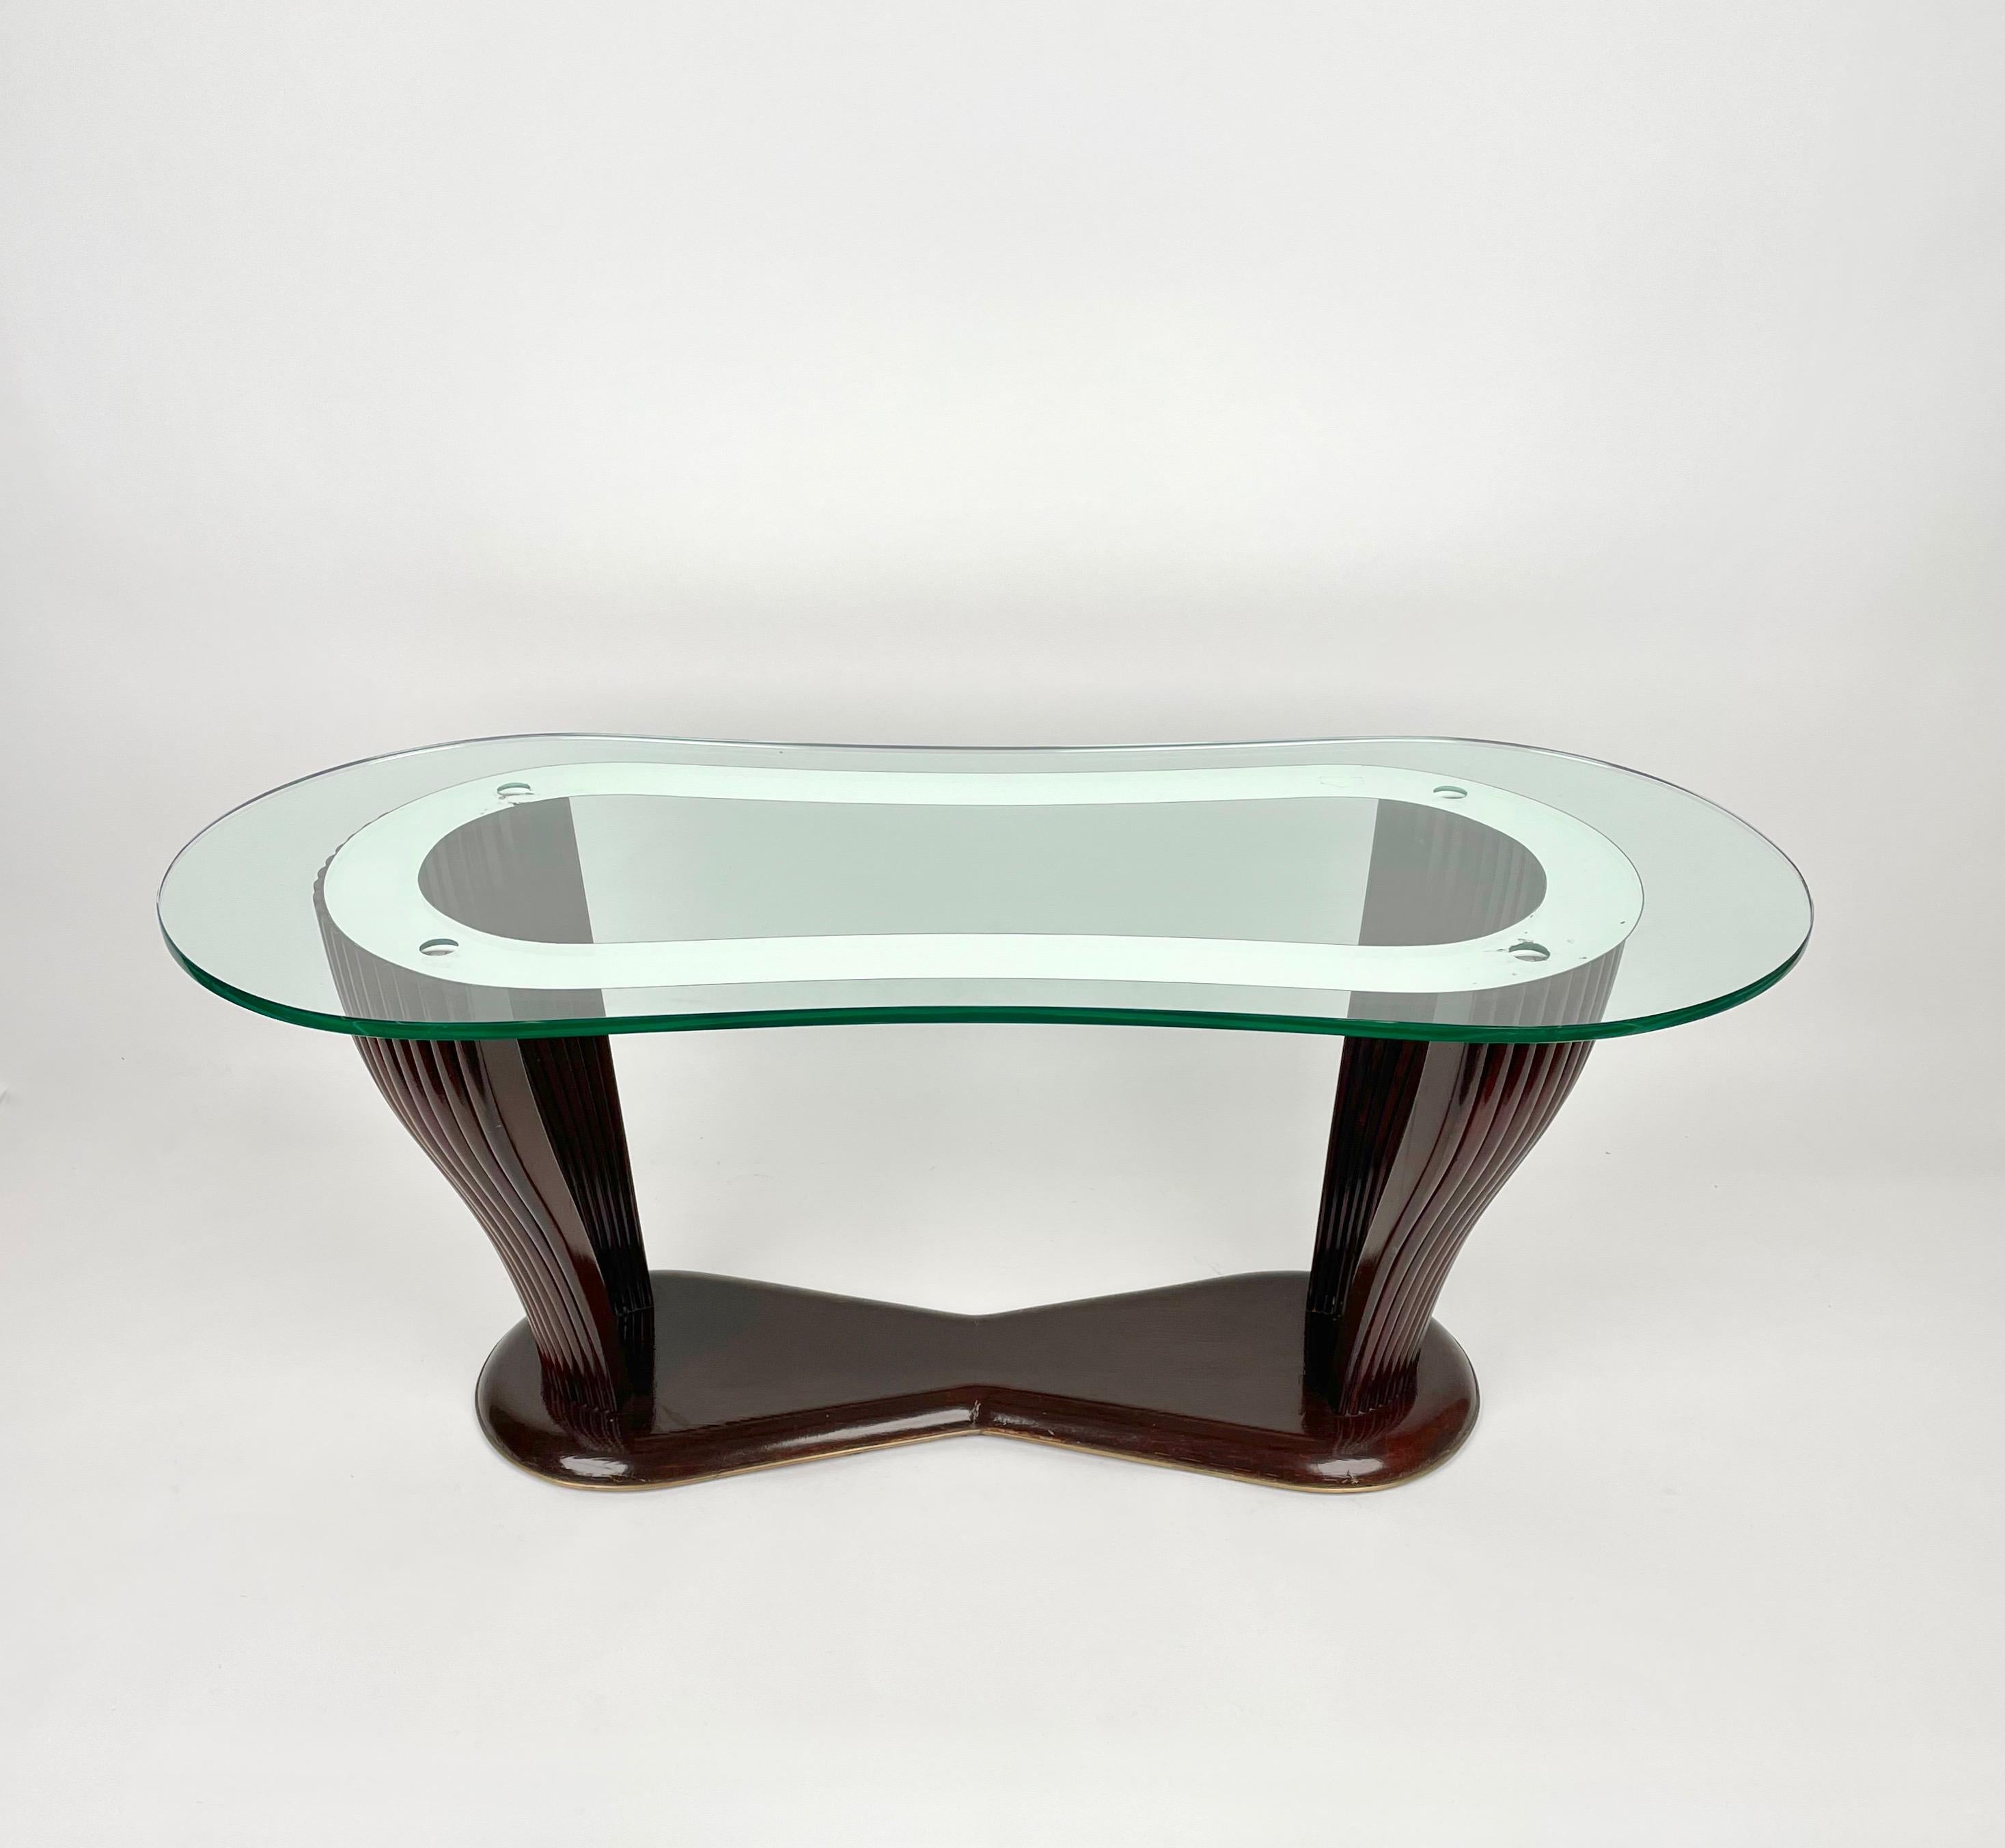 Curved oval coffee table in wood structure and glass with a mirror line framed by a brass border. Made in Italy in the 1950s, a collaboration of the Italian designers Vittorio Dassi, Santambrogio and De Berti.

The original label saying